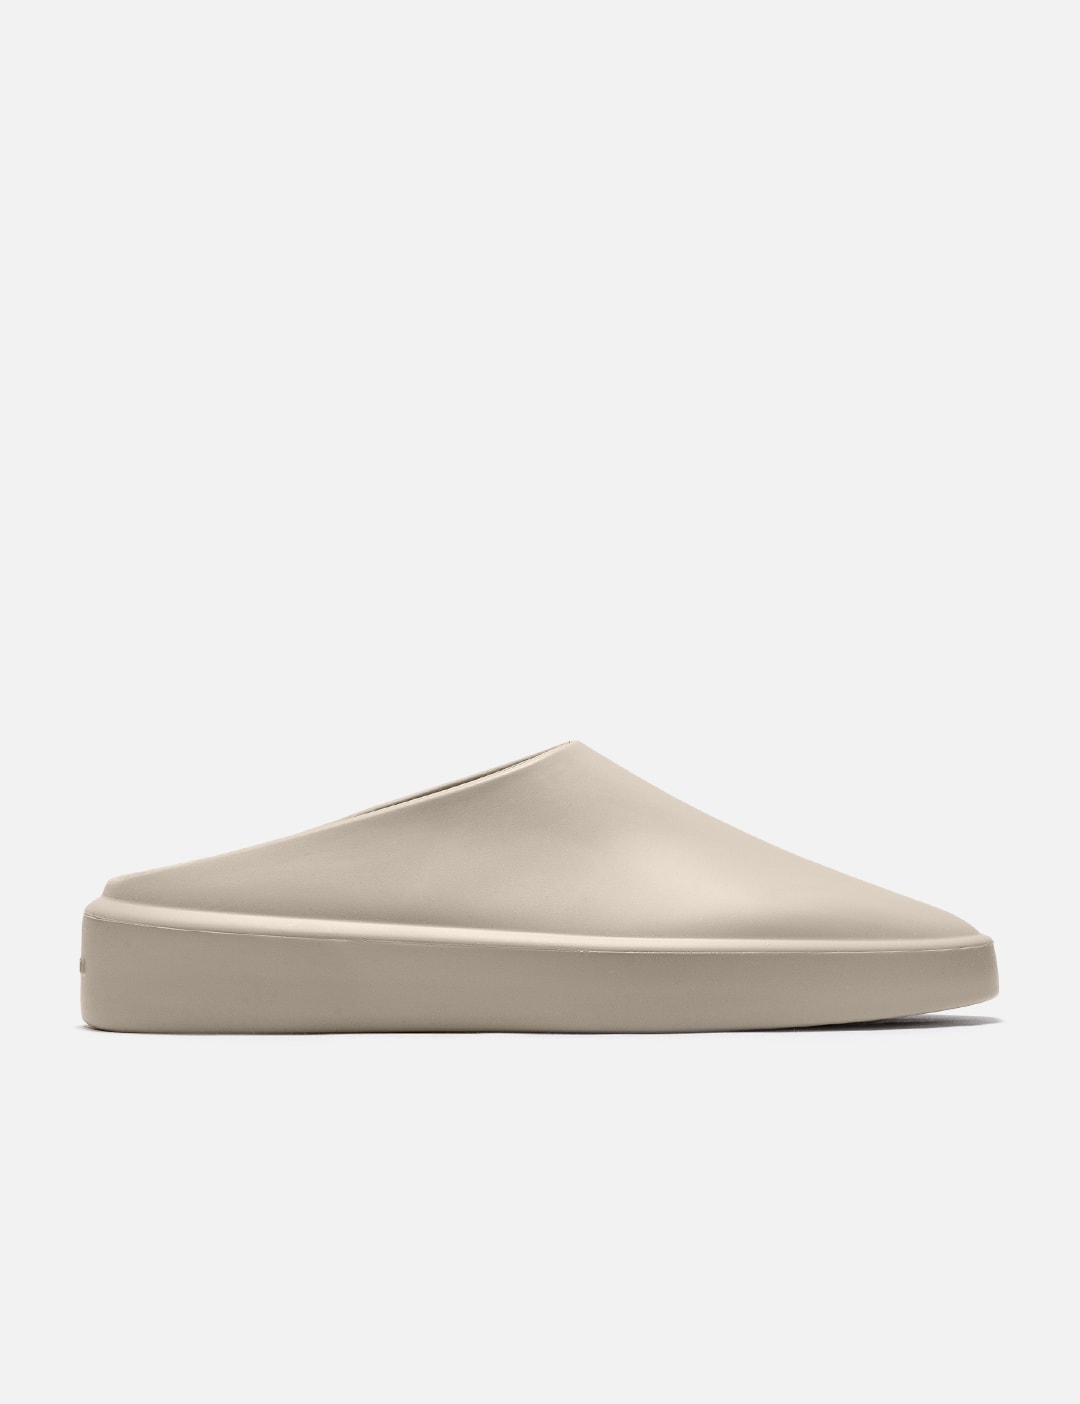 Fear of God - The California Sandals | HBX - Globally Curated Fashion ...